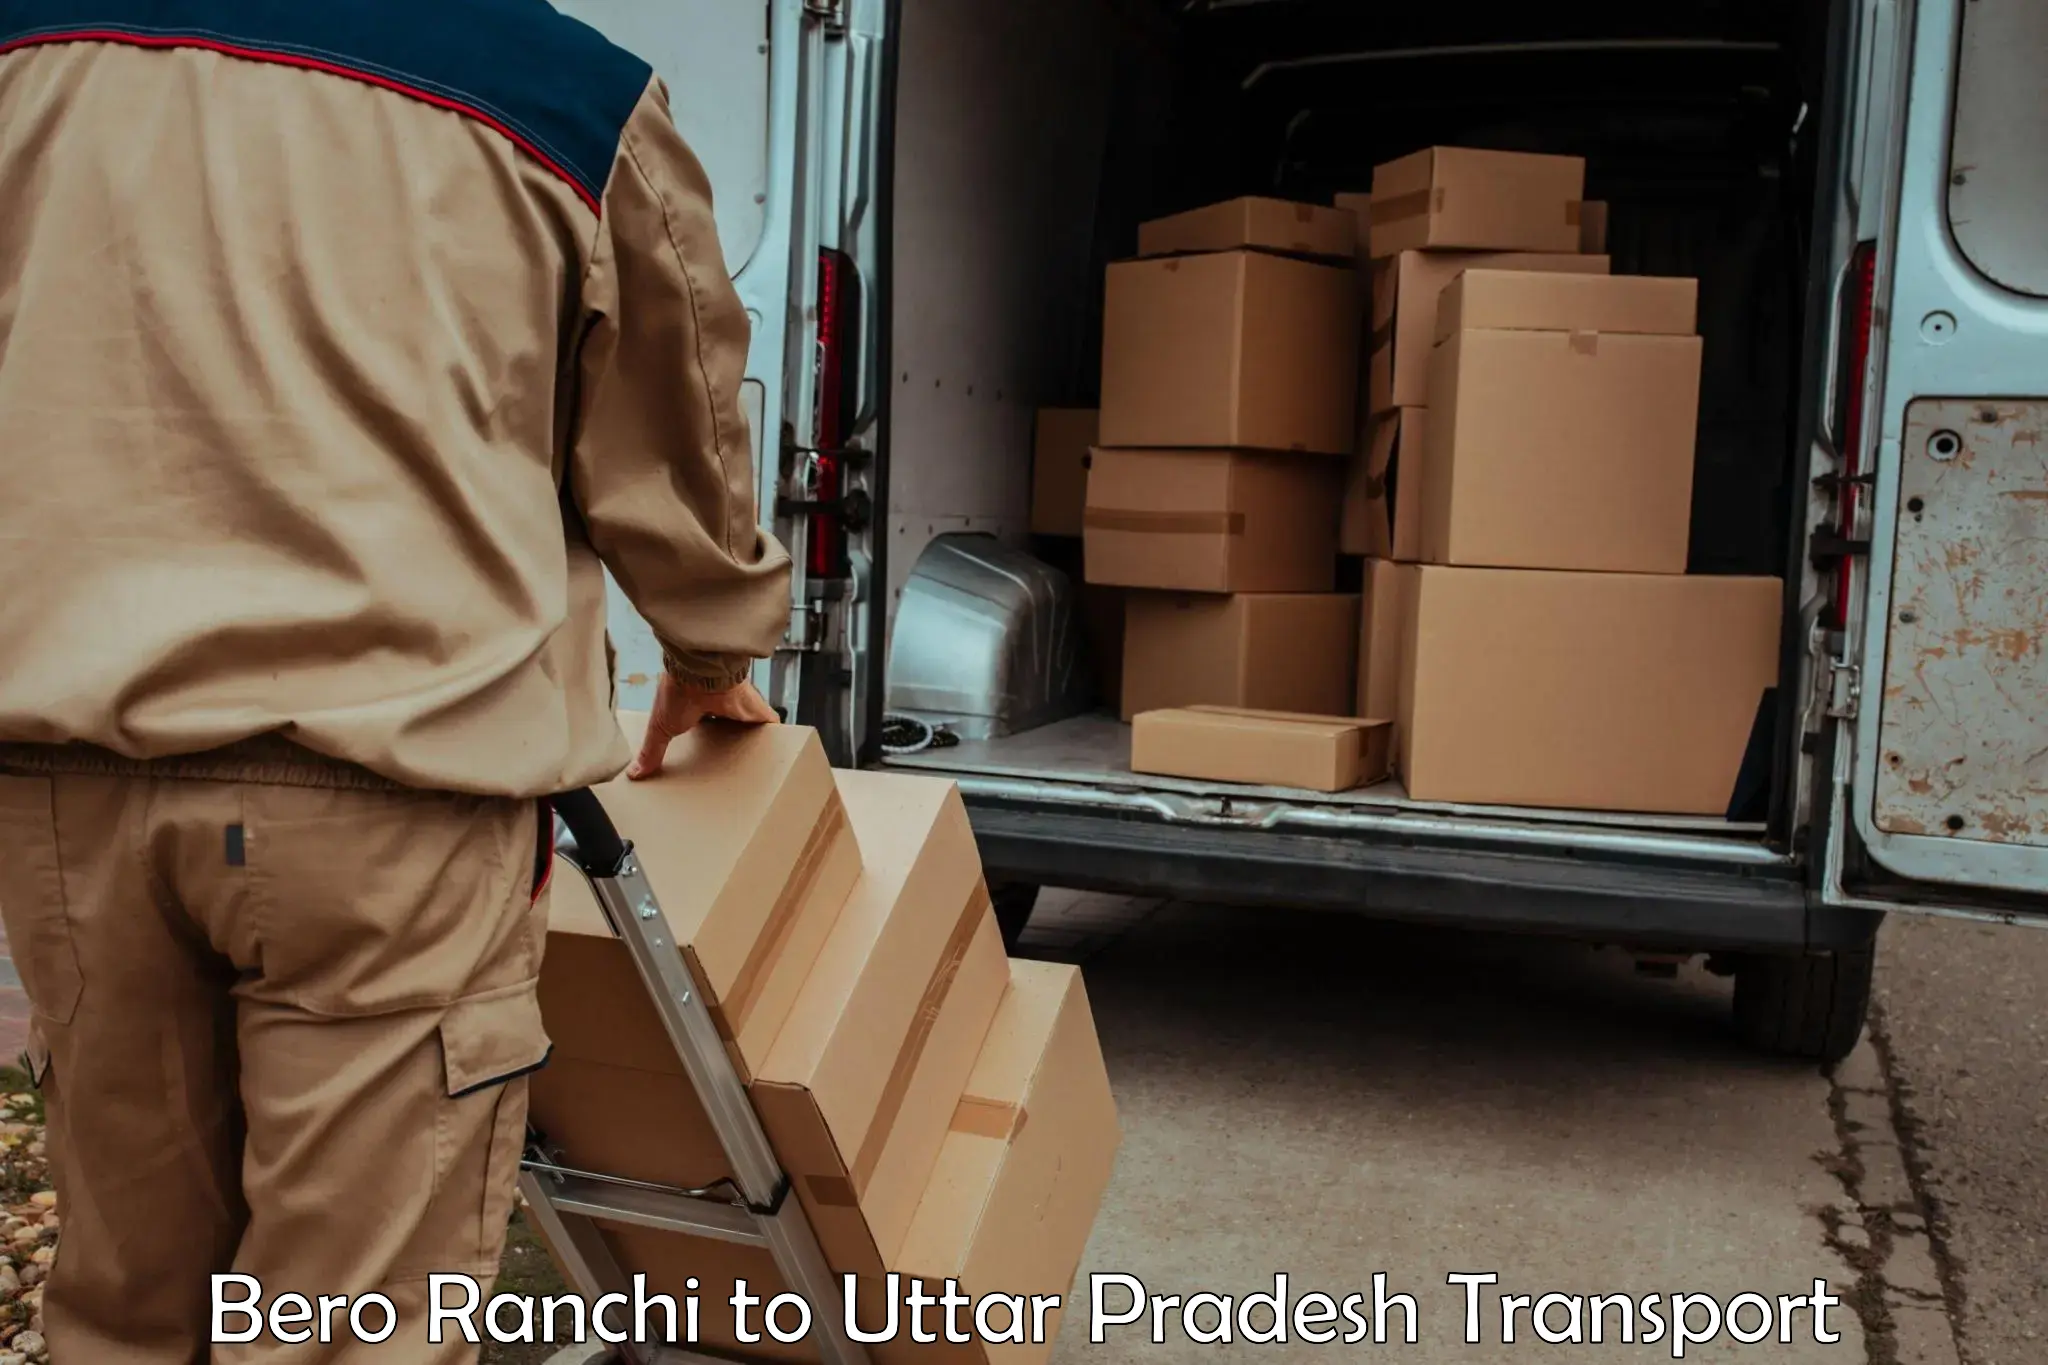 Best transport services in India in Bero Ranchi to Aligarh